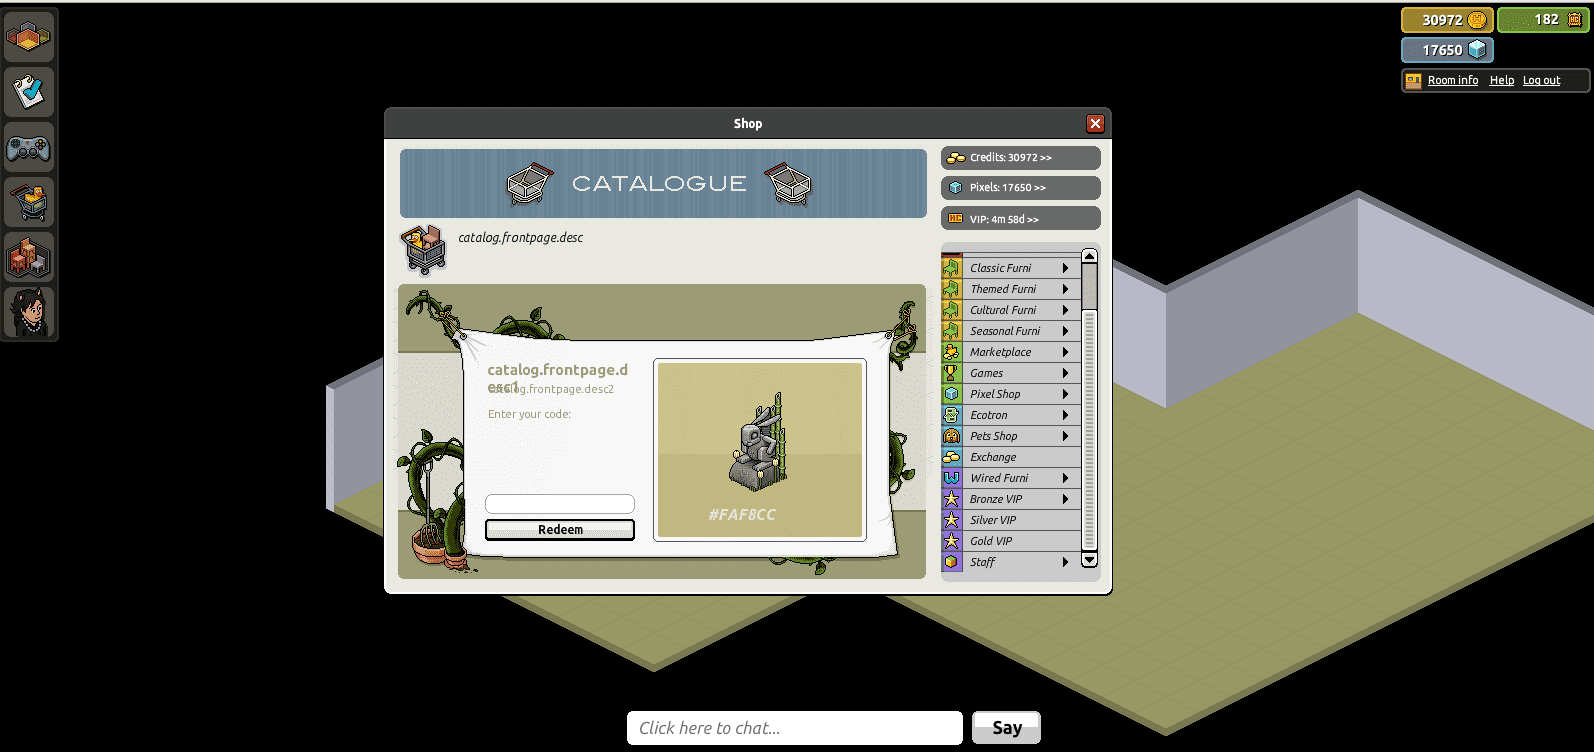 7H30hfY - [R63] Habbo.swf with new catalog model - UPD1 - RaGEZONE Forums